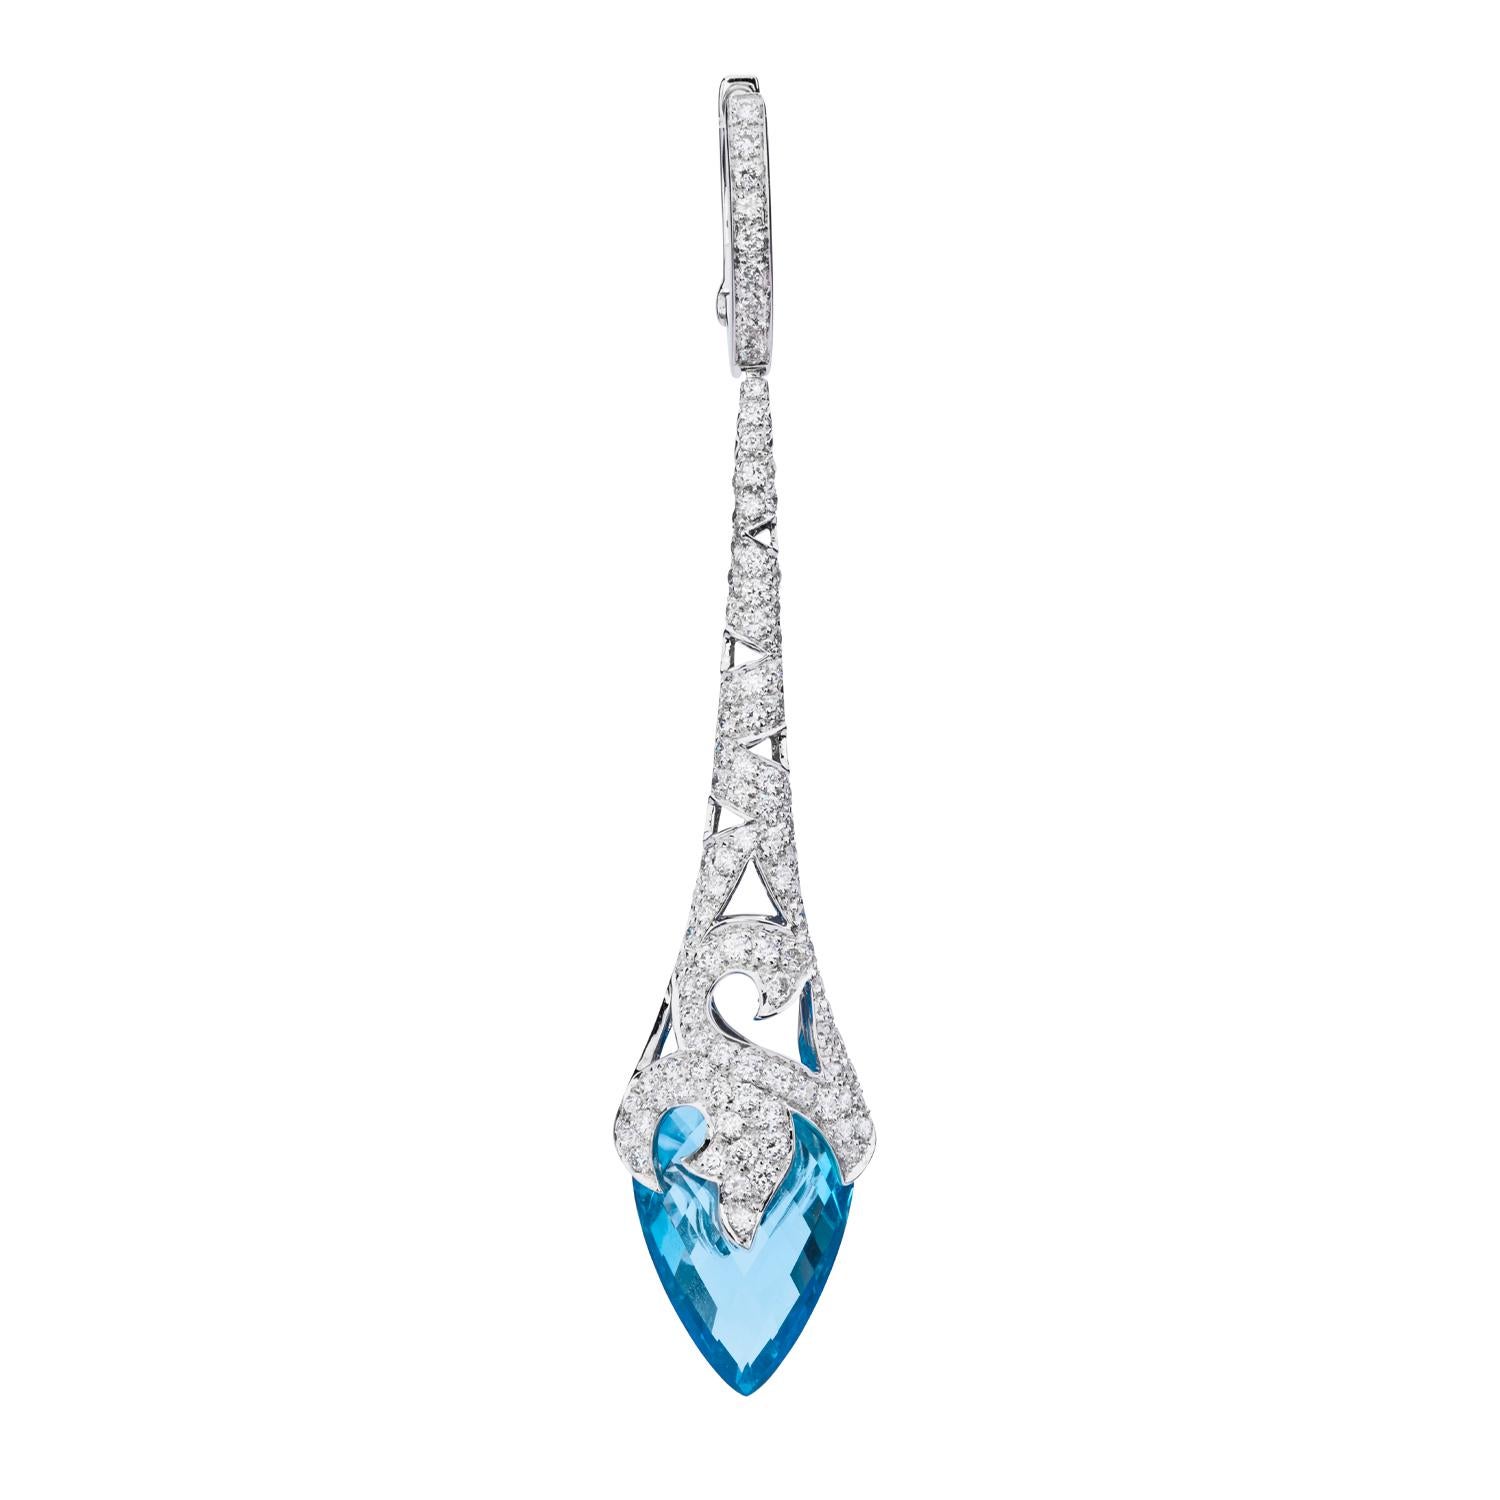 Thorn Entwined Drop Earrings set in 18ct white Gold with white Diamond pavé (1.66ct) and solid blue Topaz drops (17.00ct).

Built on a foundation of 40 years of technical excellence, where Webster began his apprenticeship at the age of 16 in